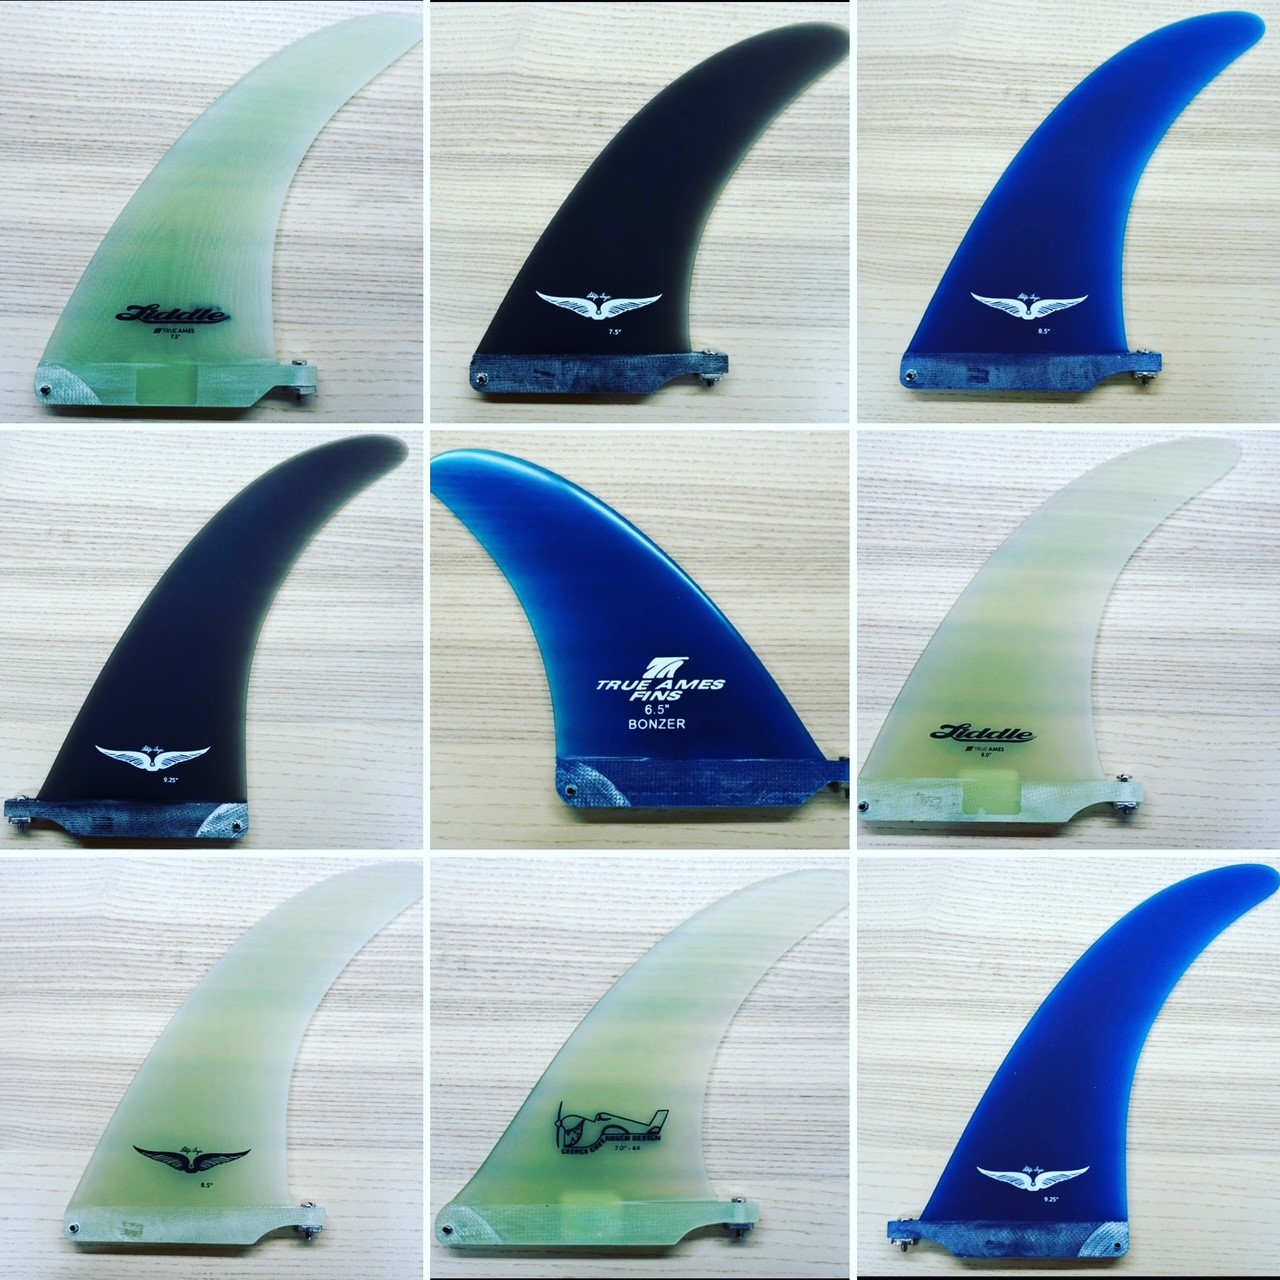 ２０％Off sale for Fins